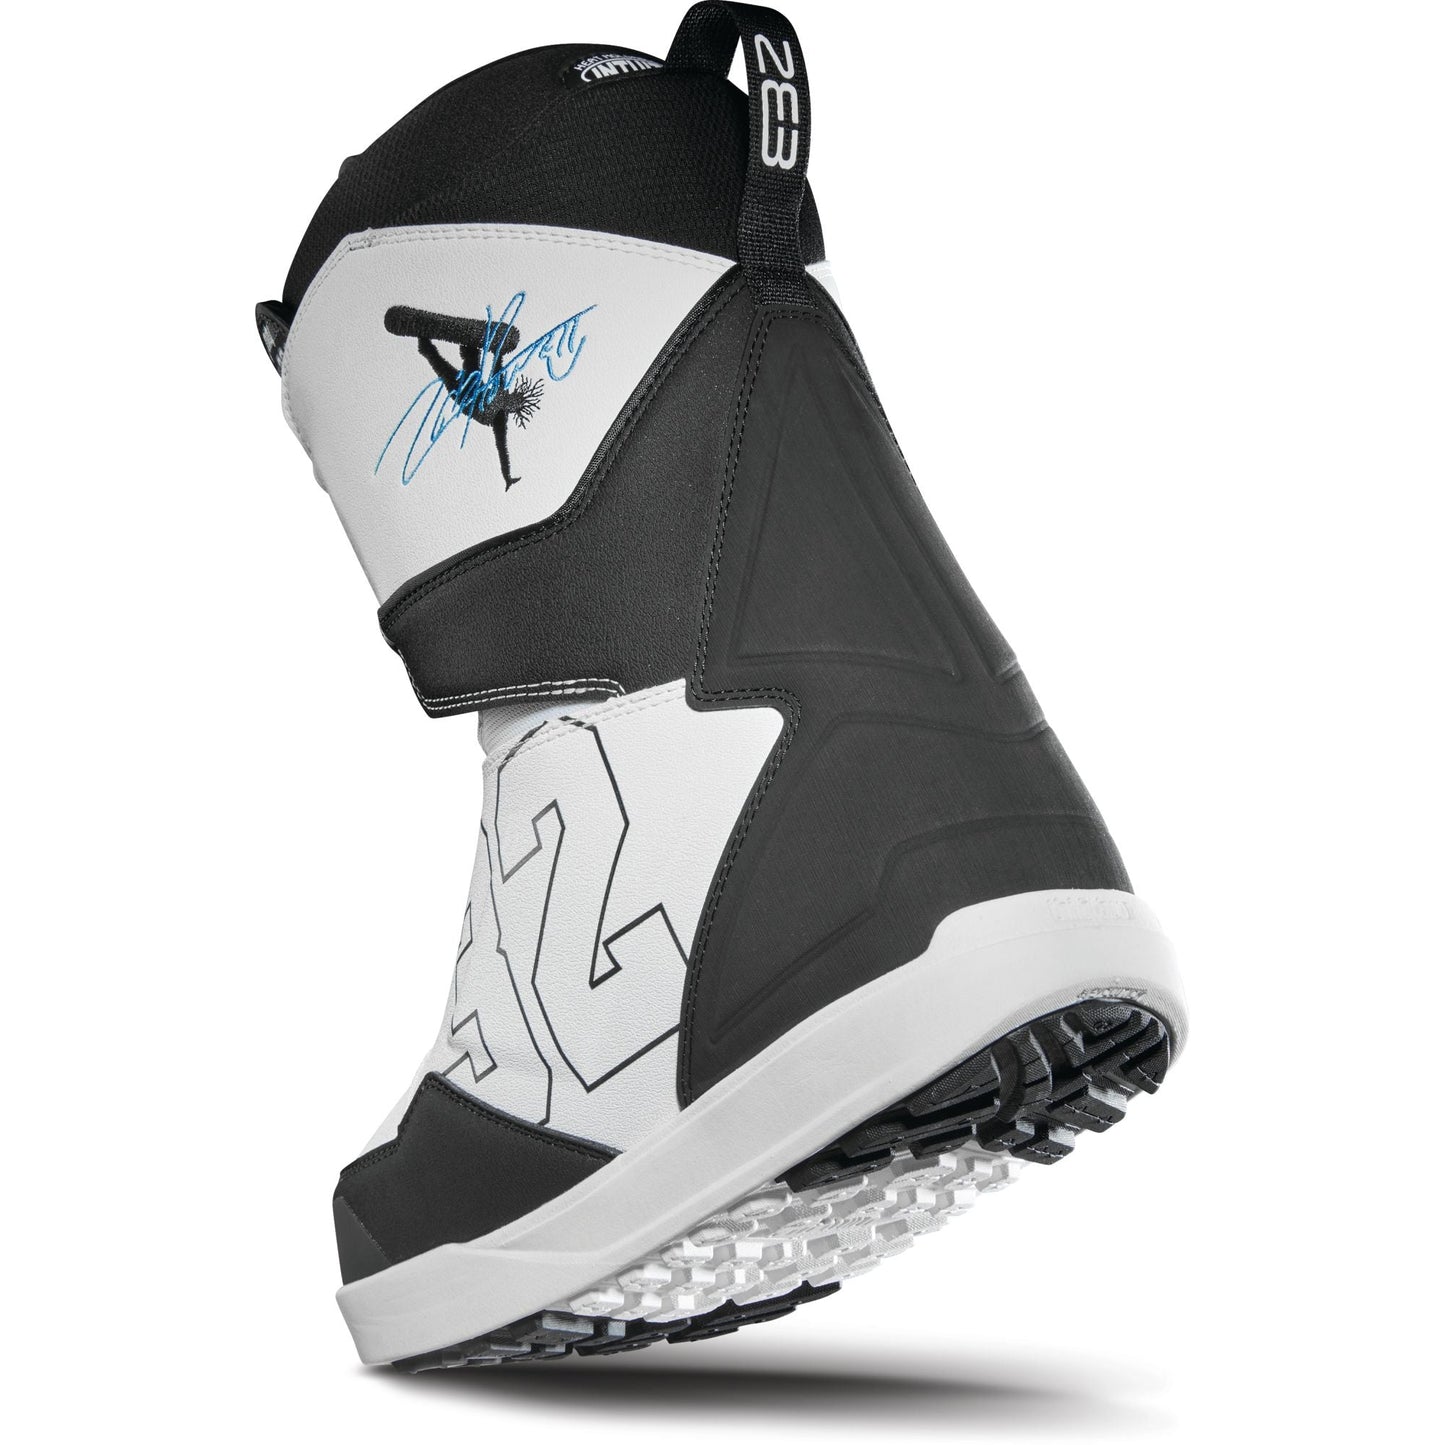 ThirtyTwo Lashed Powell Double BOA Snowboard Boots - Openbox White Black Snowboard Boots